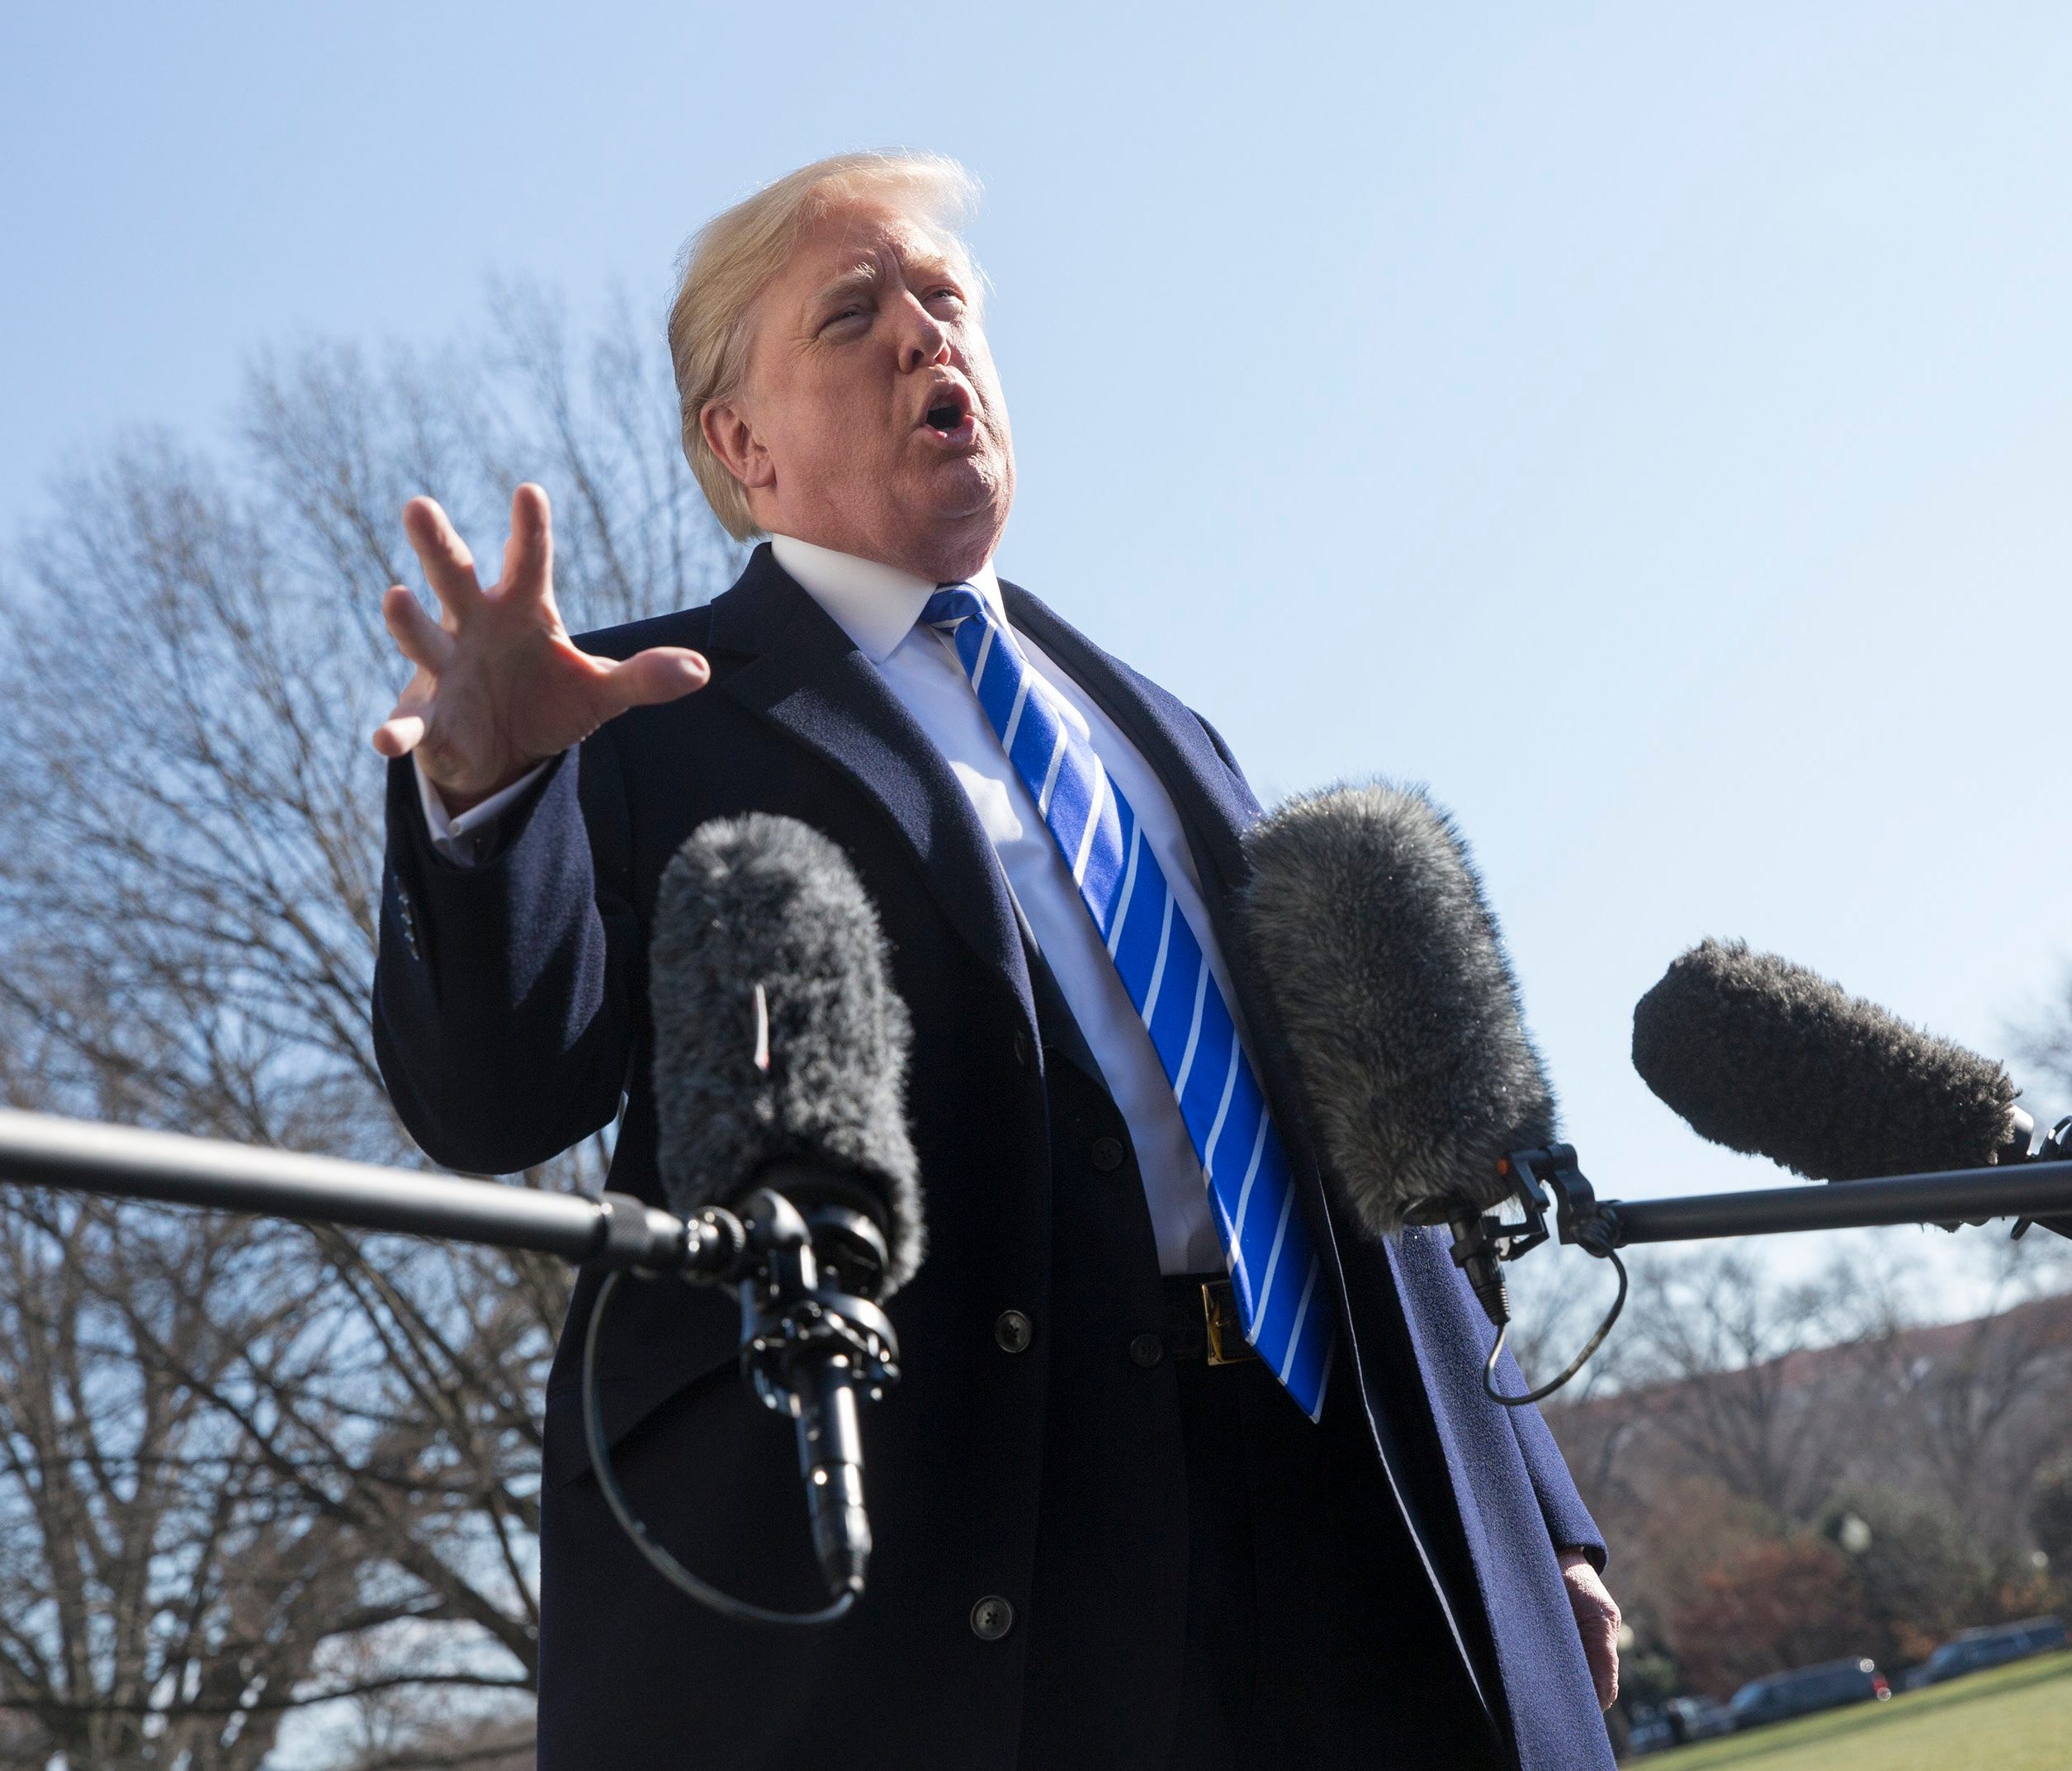 President Trump is pictured  speaking to reporters as he departs the White House.